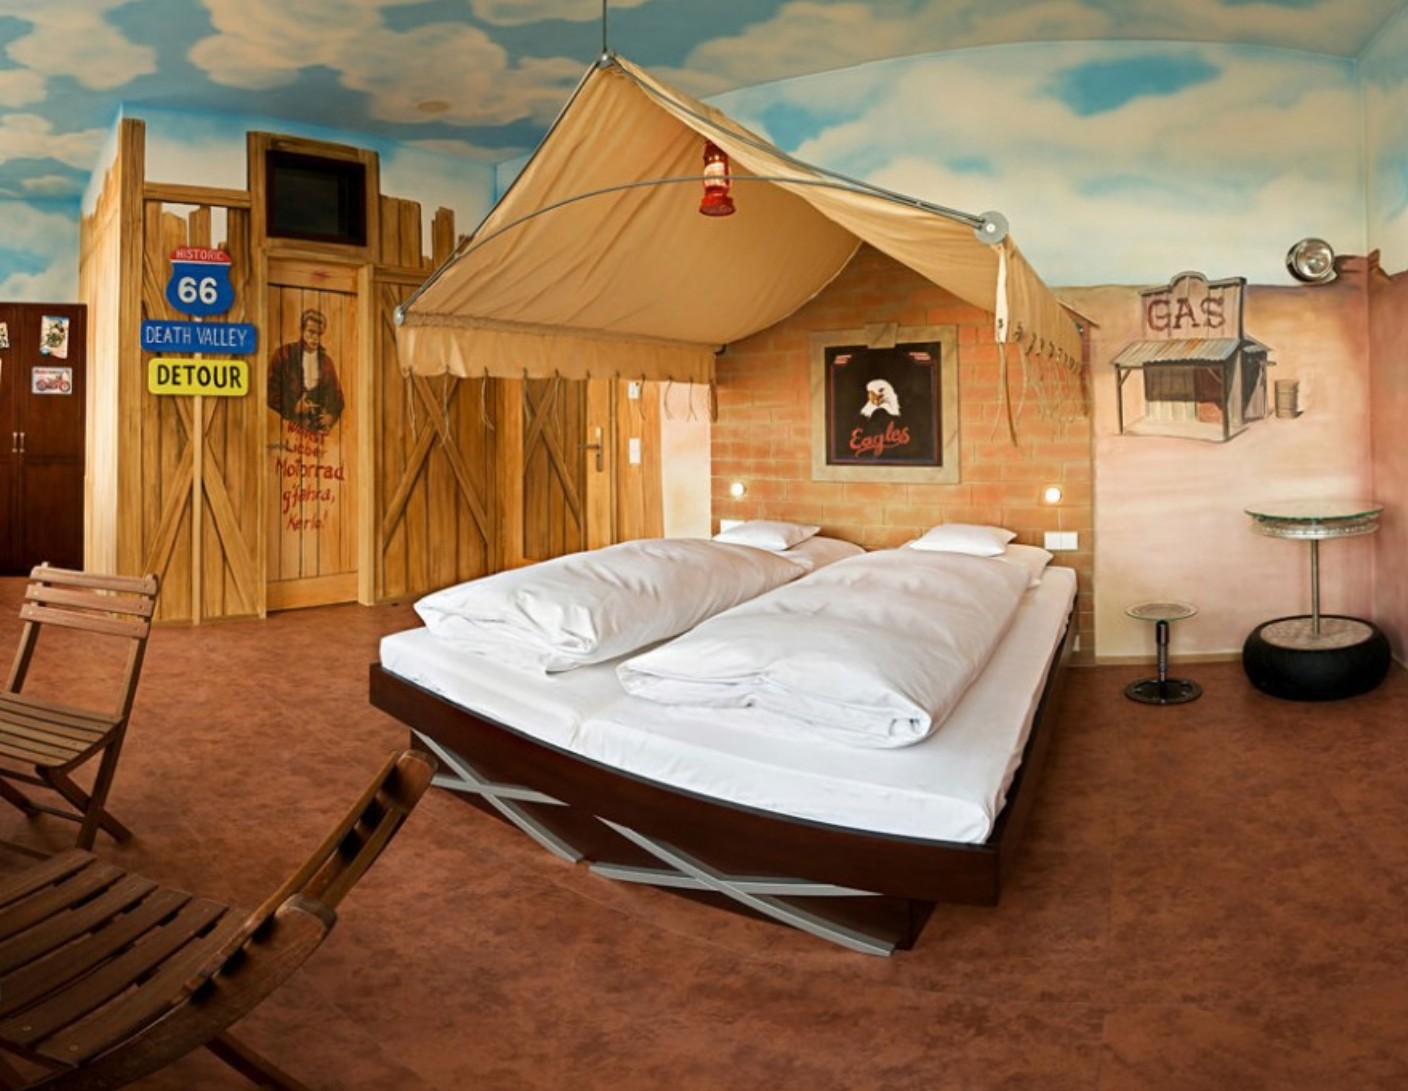 Country Cowboy Room Incredible Country Cowboy Themed Kids Room Furniture Decor For 2 Boys Design Ideas With Classic Dark Brown Bed Frame Design Also Creative Brown Tent Canopy Bed And Sky Blue Ceiling Paint Ideas Furniture Composing The Special Type Of Kids Room Furniture